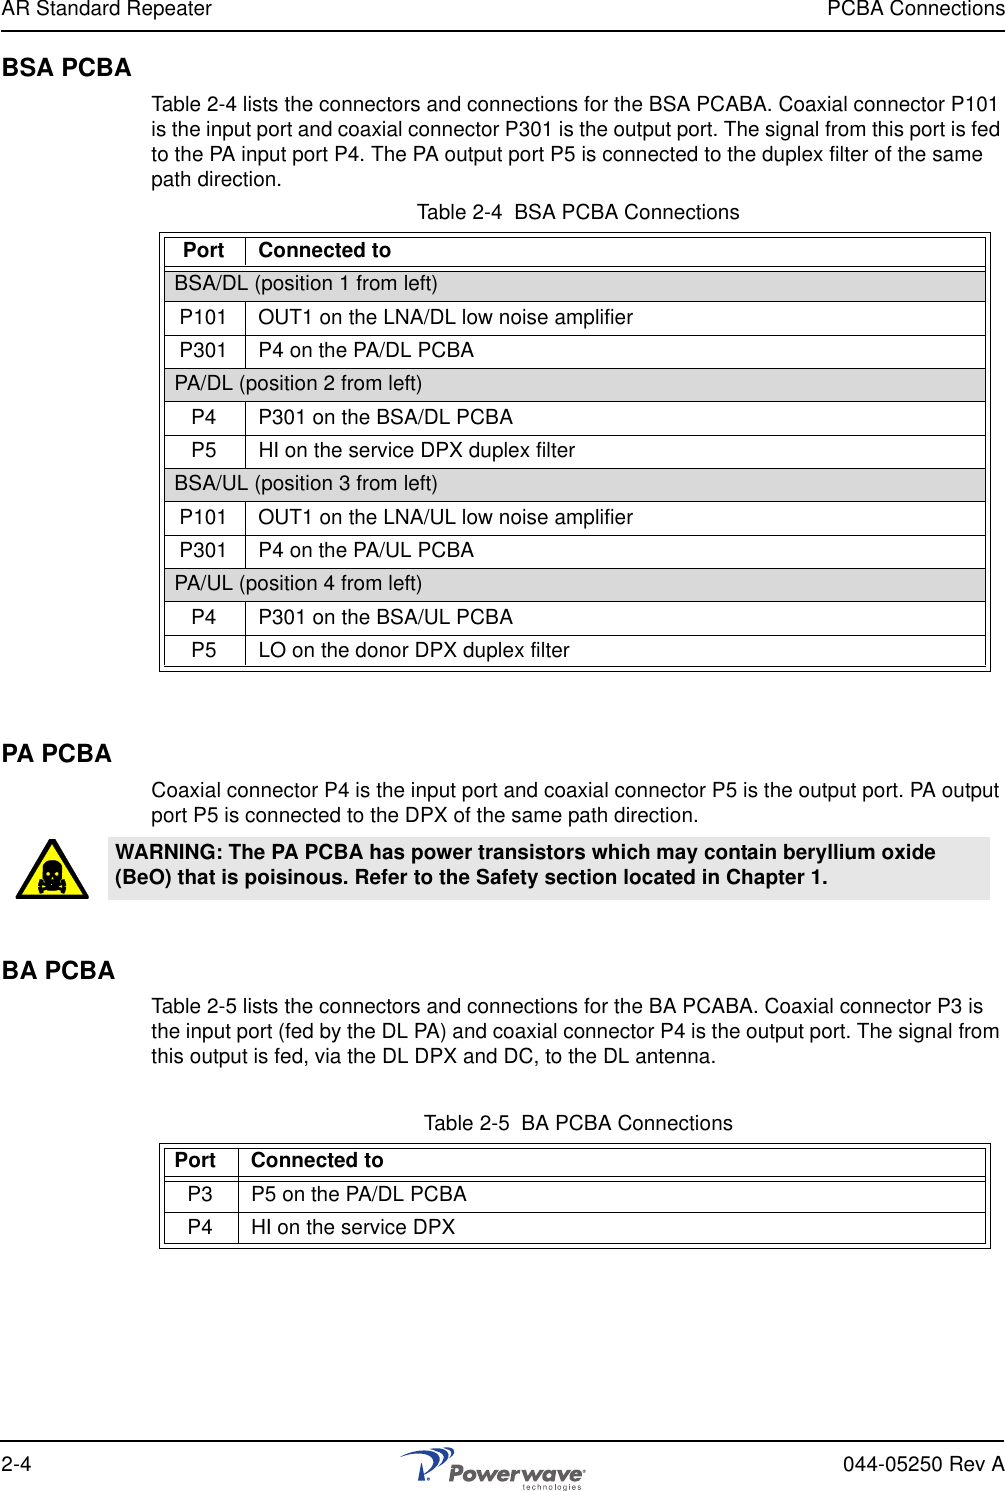 AR Standard Repeater PCBA Connections2-4 044-05250 Rev ABSA PCBATable 2-4 lists the connectors and connections for the BSA PCABA. Coaxial connector P101 is the input port and coaxial connector P301 is the output port. The signal from this port is fed to the PA input port P4. The PA output port P5 is connected to the duplex filter of the same path direction.Table 2-4  BSA PCBA ConnectionsPA PCBACoaxial connector P4 is the input port and coaxial connector P5 is the output port. PA output port P5 is connected to the DPX of the same path direction. BA PCBATable 2-5 lists the connectors and connections for the BA PCABA. Coaxial connector P3 is the input port (fed by the DL PA) and coaxial connector P4 is the output port. The signal from this output is fed, via the DL DPX and DC, to the DL antenna.Table 2-5  BA PCBA ConnectionsPort Connected toBSA/DL (position 1 from left)P101 OUT1 on the LNA/DL low noise amplifierP301 P4 on the PA/DL PCBAPA/DL (position 2 from left)P4 P301 on the BSA/DL PCBAP5 HI on the service DPX duplex filterBSA/UL (position 3 from left)P101 OUT1 on the LNA/UL low noise amplifierP301 P4 on the PA/UL PCBAPA/UL (position 4 from left)P4 P301 on the BSA/UL PCBAP5 LO on the donor DPX duplex filterWARNING: The PA PCBA has power transistors which may contain beryllium oxide (BeO) that is poisinous. Refer to the Safety section located in Chapter 1.Port Connected toP3 P5 on the PA/DL PCBAP4 HI on the service DPX